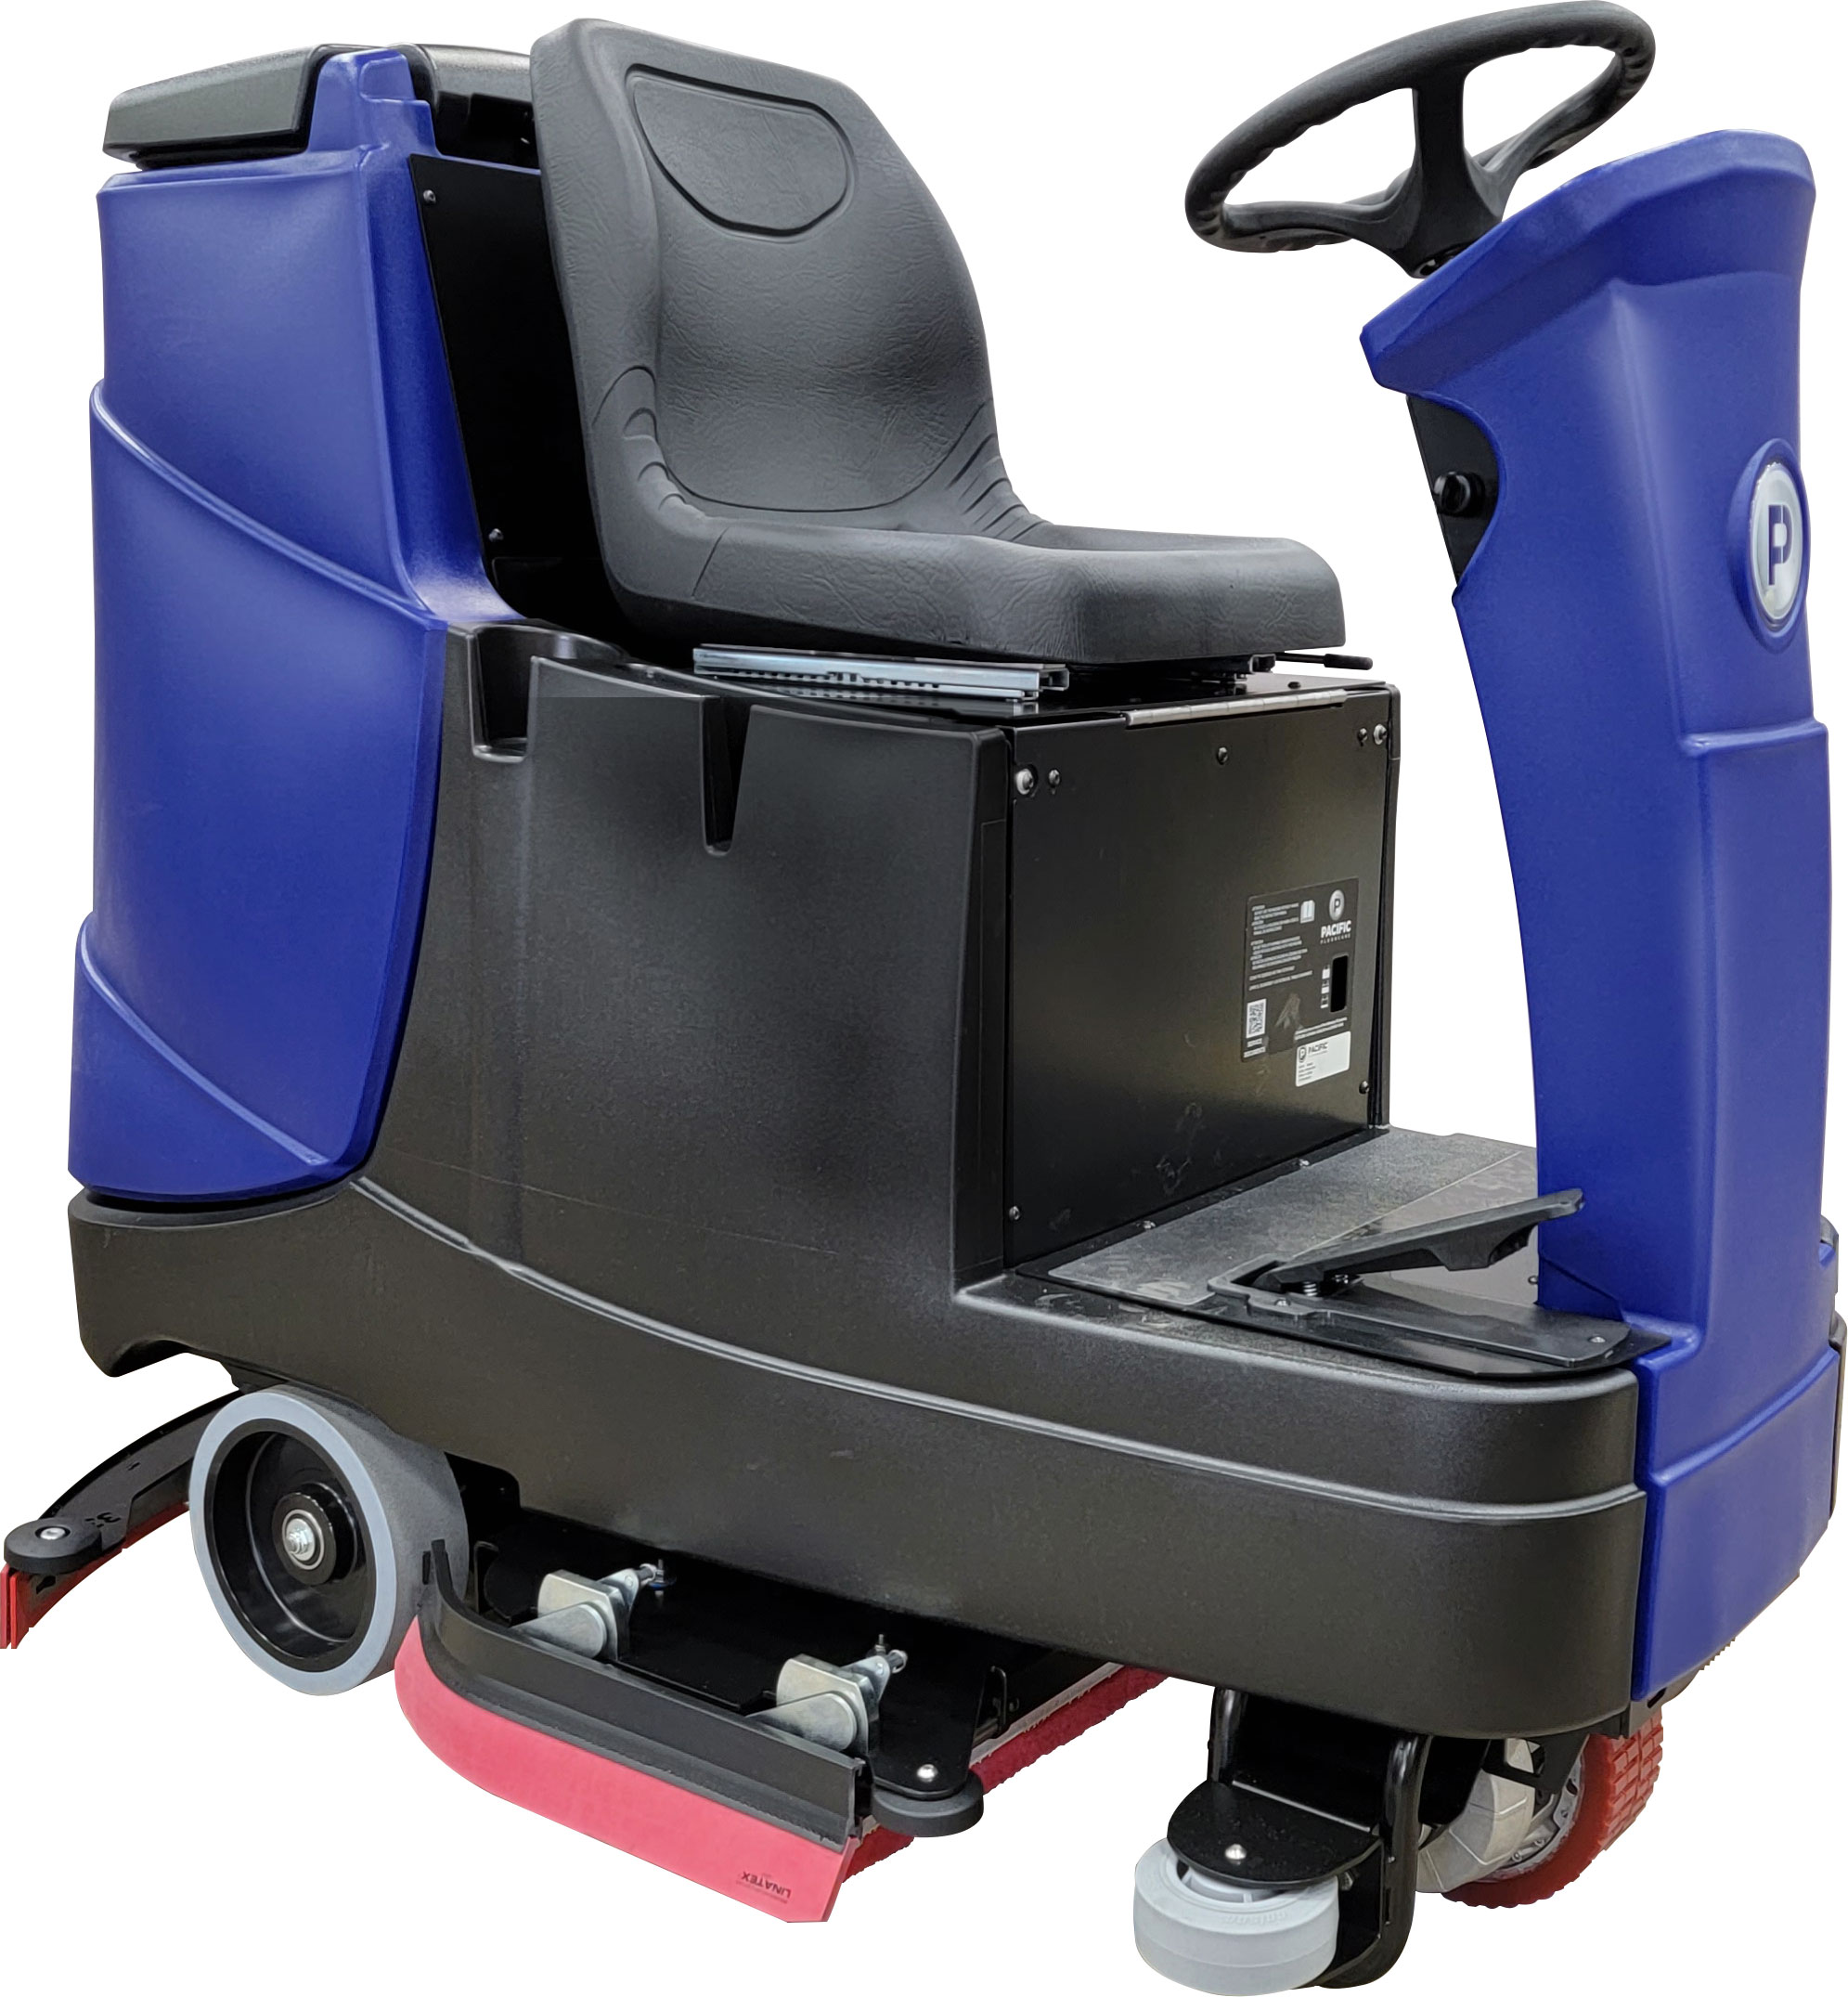 Pacific Floorcare® S-24XM 24 Battery Powered Floor Scrubber (11